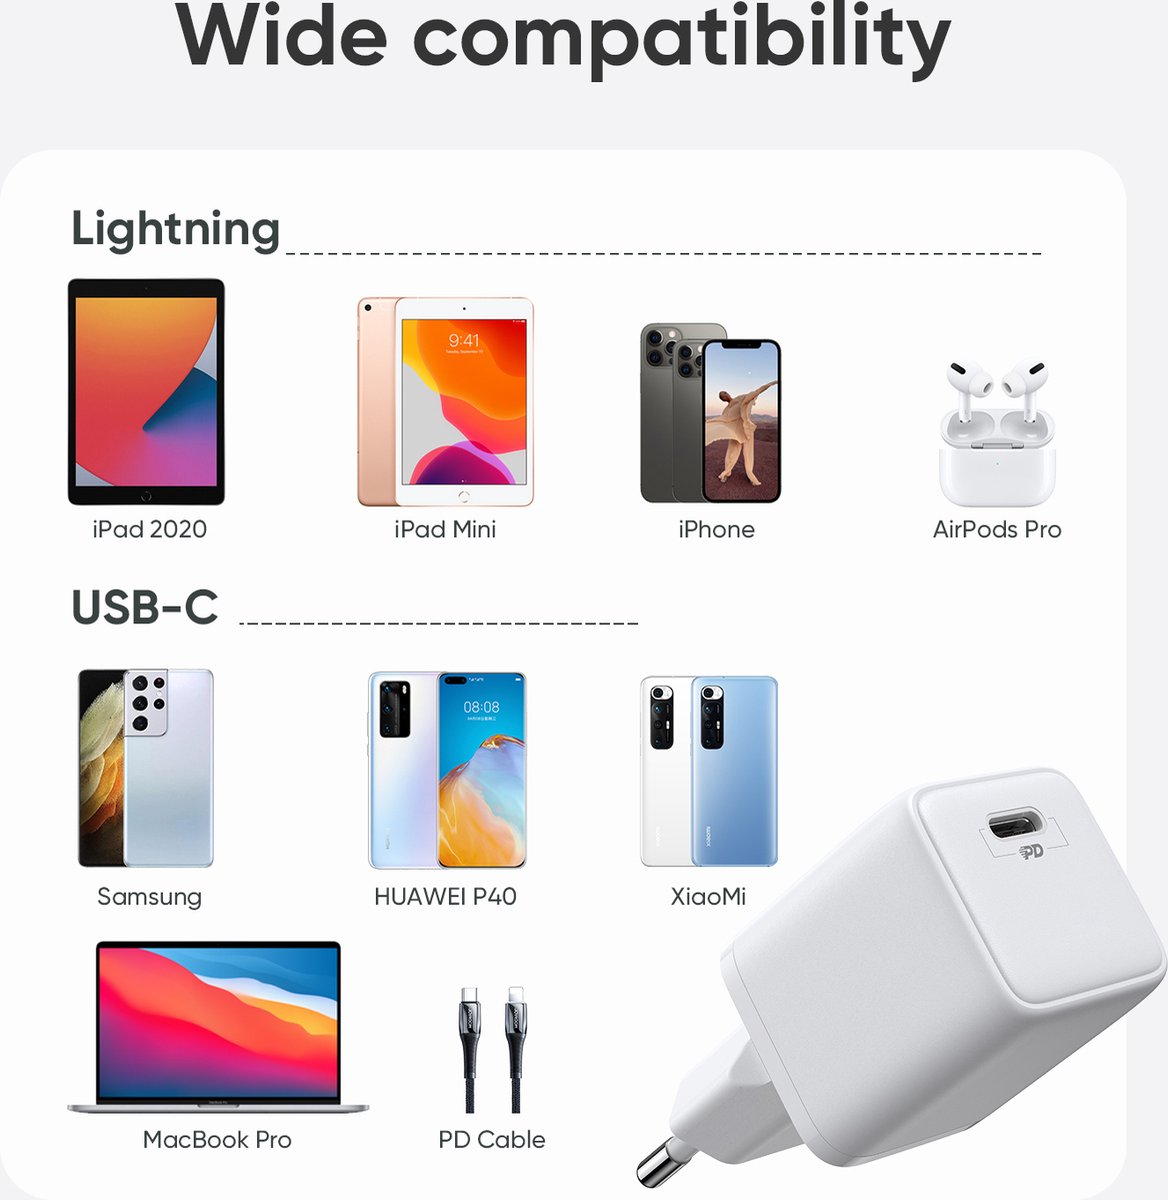 Chargeur Charger MY1W2ZM/A 30W + Câble Cable USB-C Pour iPhone 12 Pro/iPhone  12 Pro Max /iPhone 12 mini/iPhone 12/ iPhone 11 Pro/iPhone 11 Pro Max/iPhone  11/iPhone SE (2e génération)/iPhone XS/iPhone XS Max/iPhone